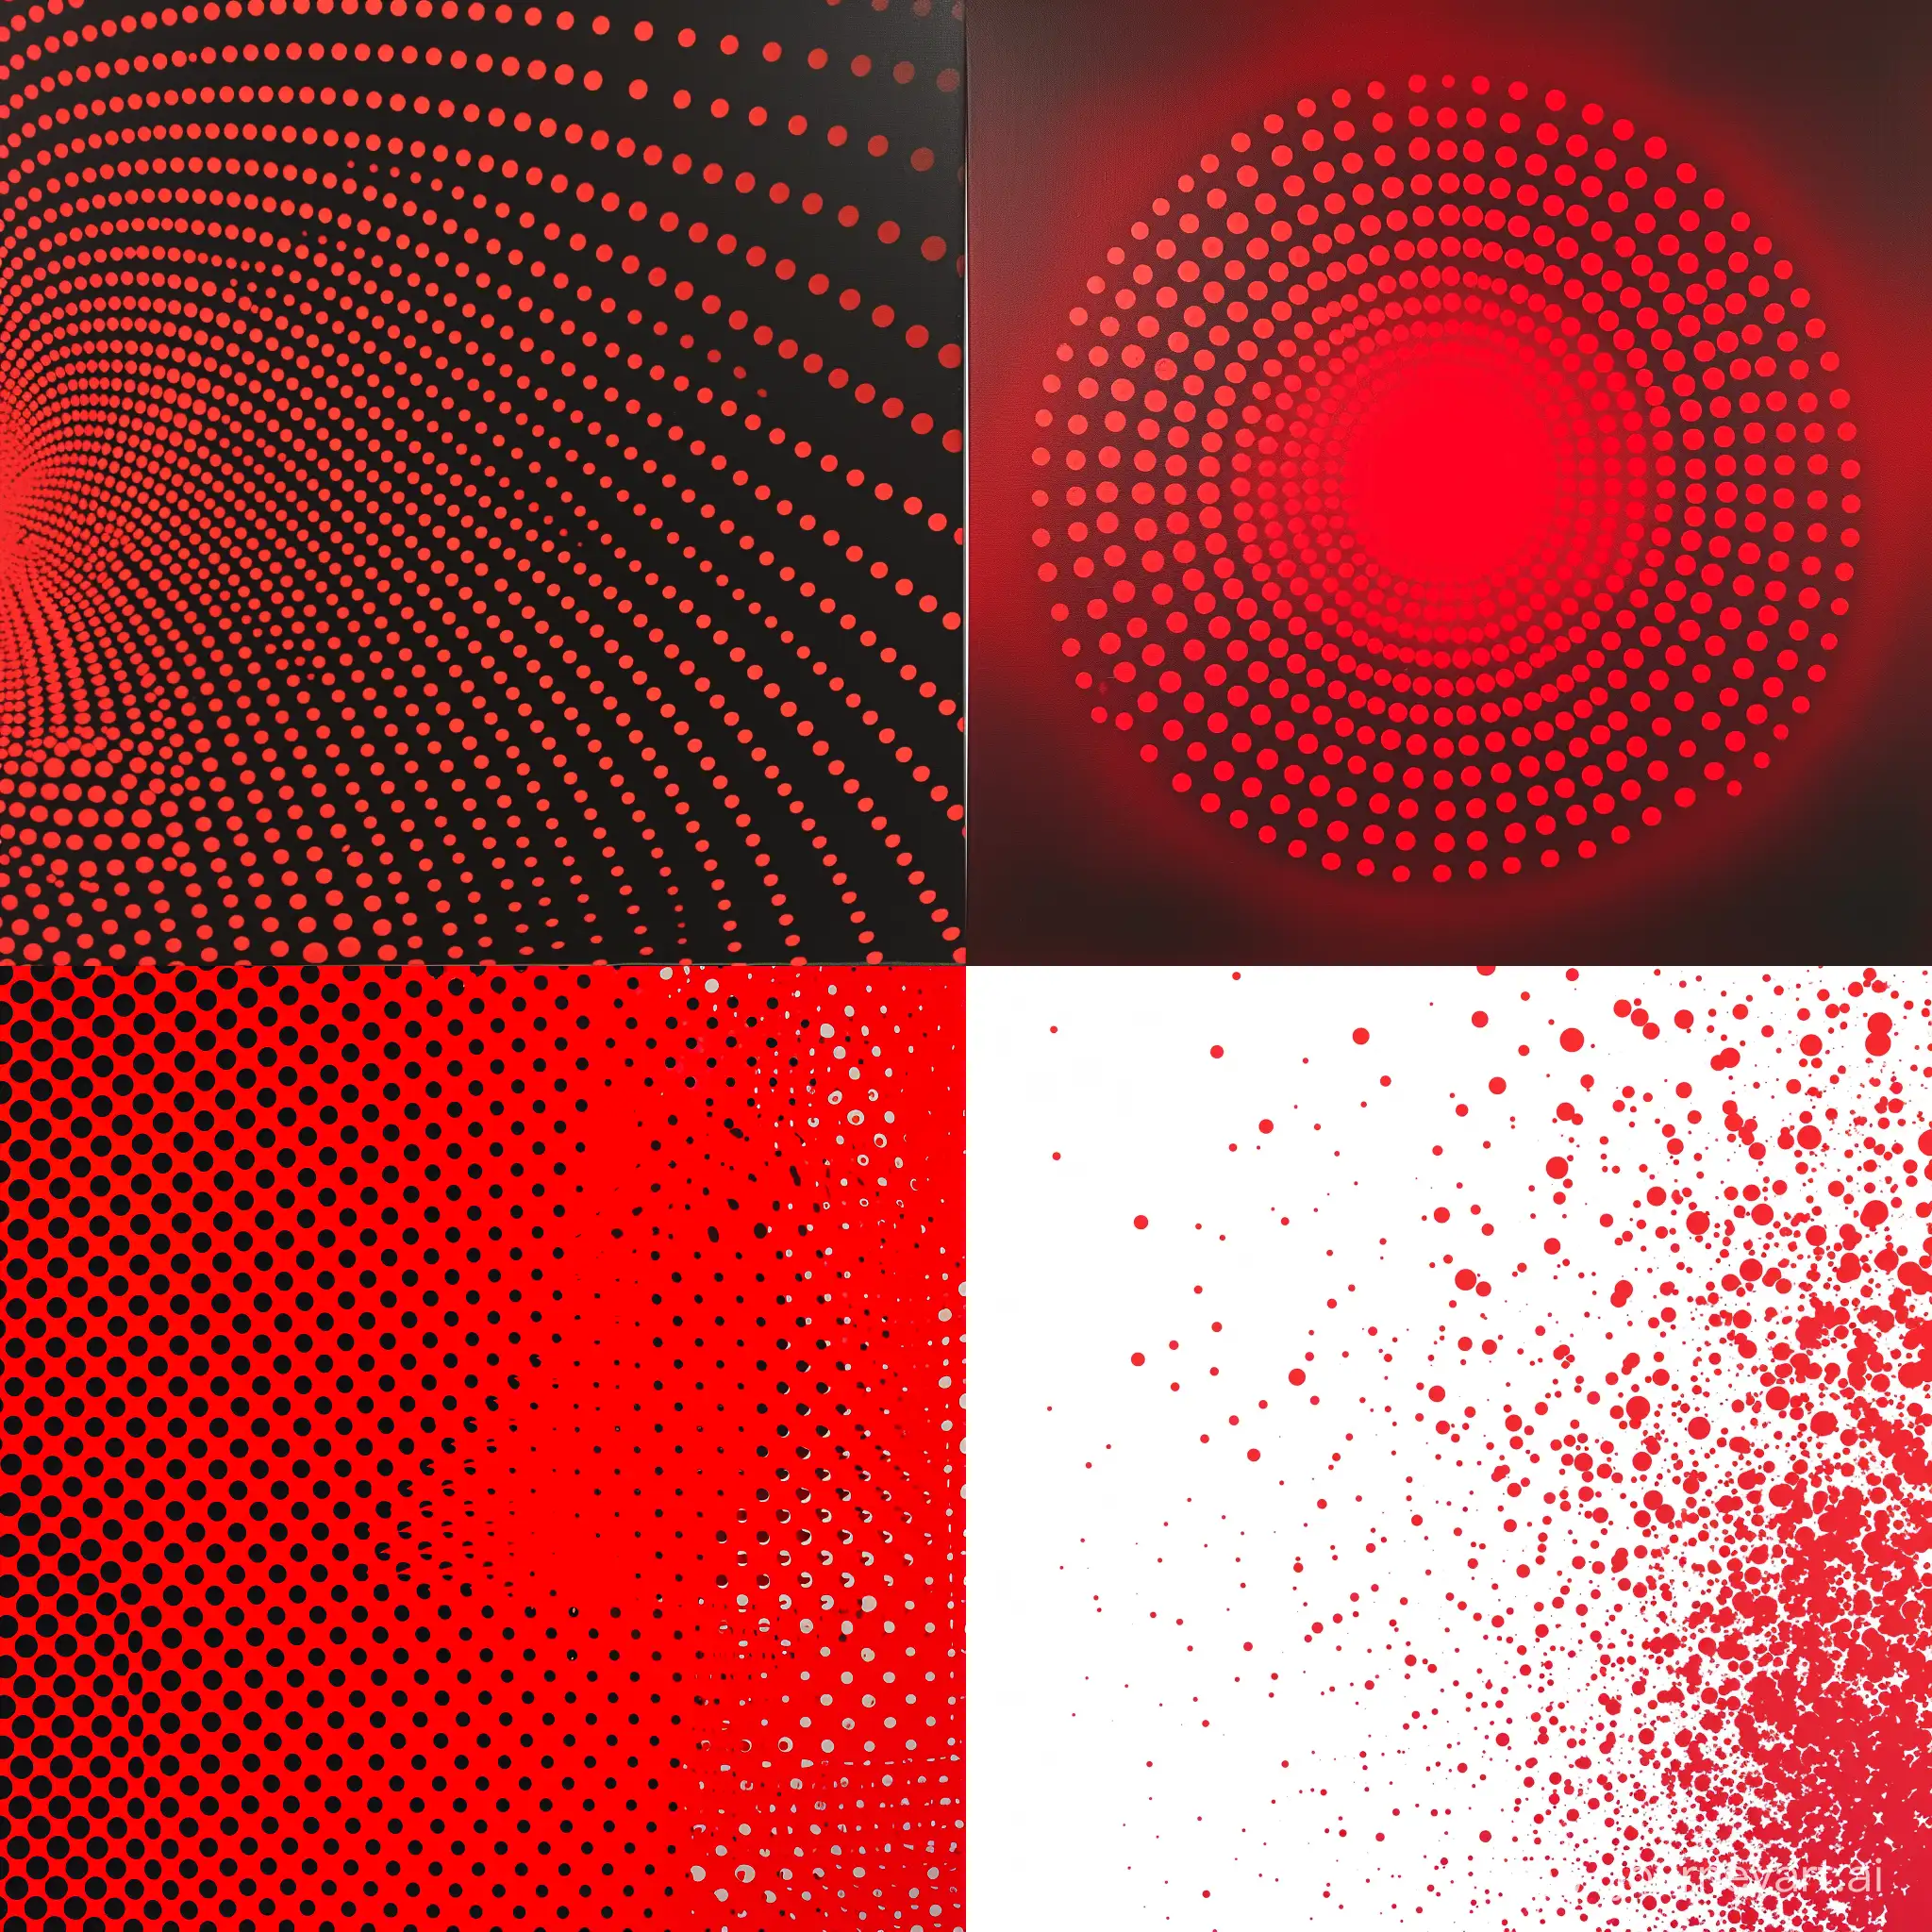 Vibrant-Red-Dots-Pattern-with-Symmetrical-Arrangement-Abstract-Art